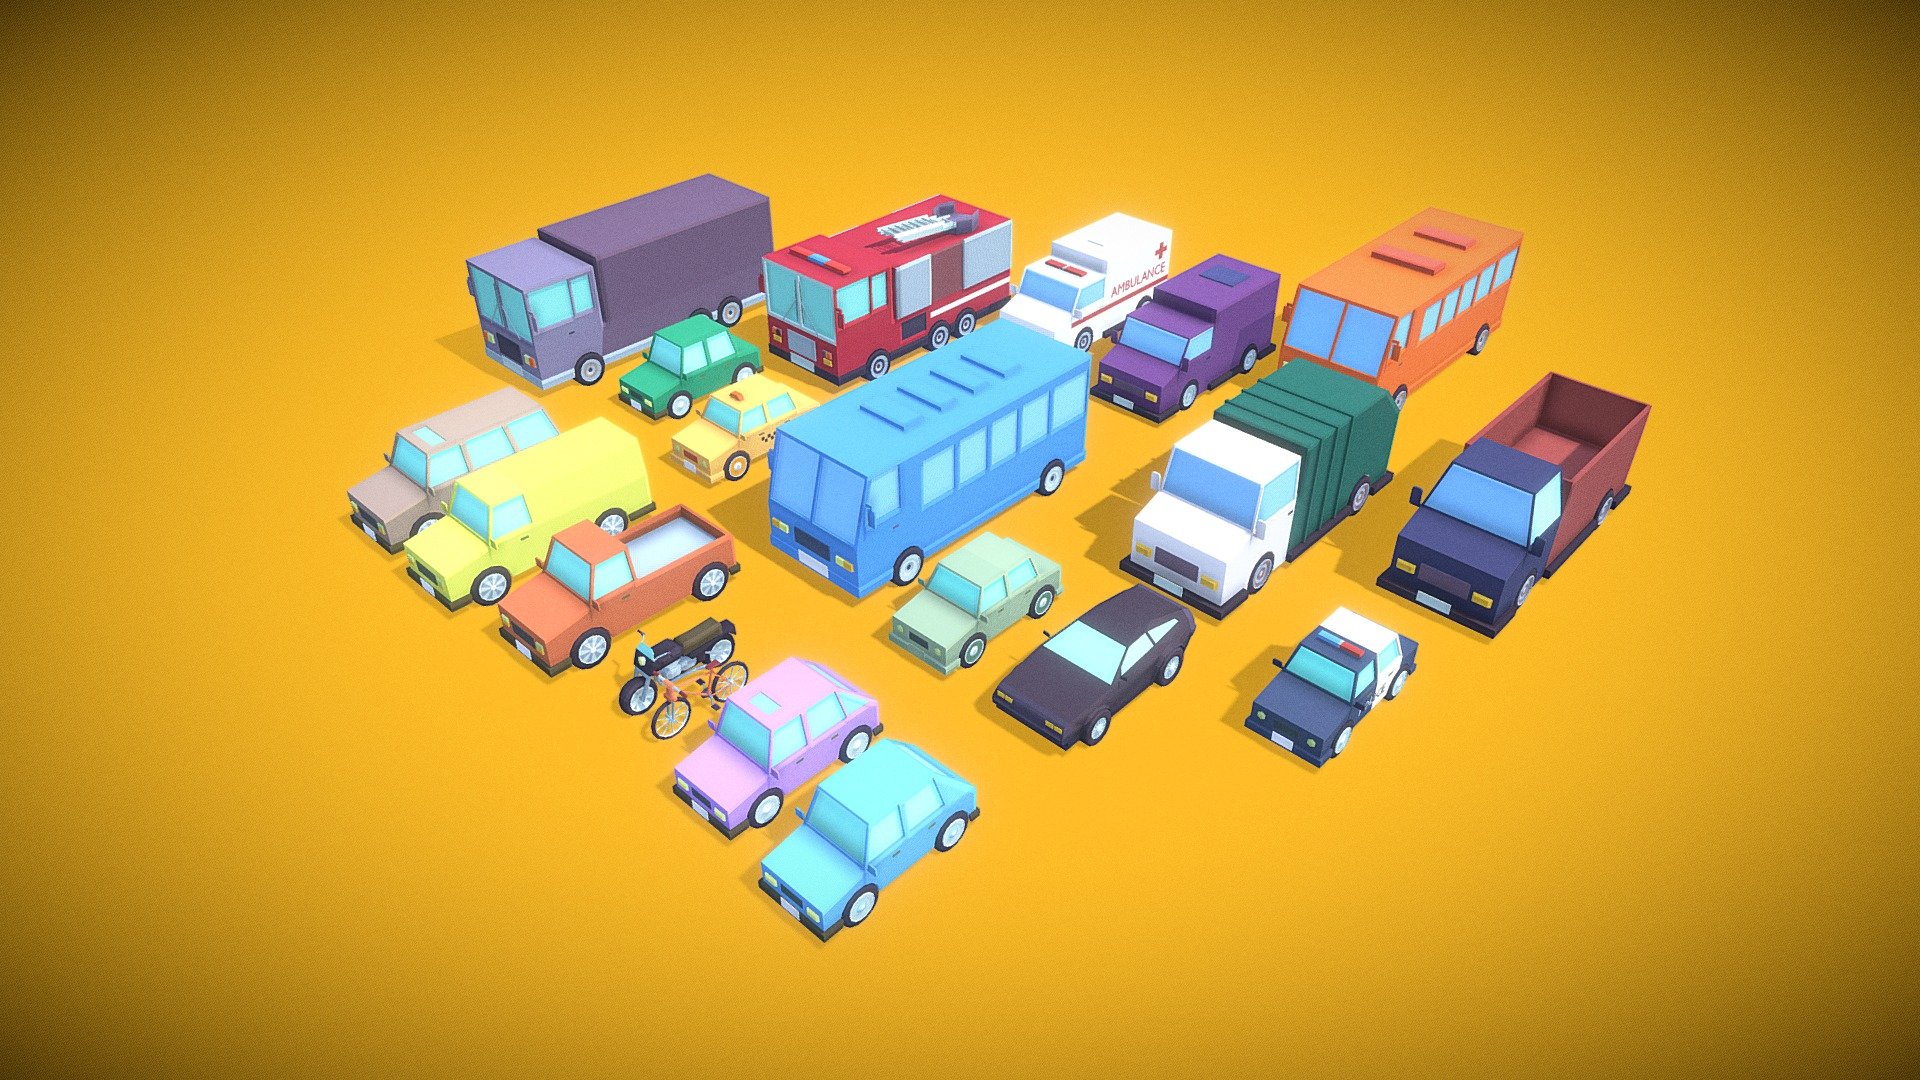 This set consists of 20 different low-poly 3D models of vehicles, designed for use in games or animations. Each model has optimized polygon count to ensure high performance and optimal visualization, even in real-time. 

These 3D vehicle models stand out with their minimalist yet recognizable forms, making them easy to integrate into any game project or animation scene. 

With this set of 3D models, you can quickly create diverse scenes featuring cars, realistic racing experiences, or use them as a foundation for your own creative projects. They are ready to use and guaranteed to elevate the quality of your game or animation work to a new level.

The models are triangulated, and each model has approximately +- 2000 triangles, striking a balance between detail and performance optimization for your project 3d model